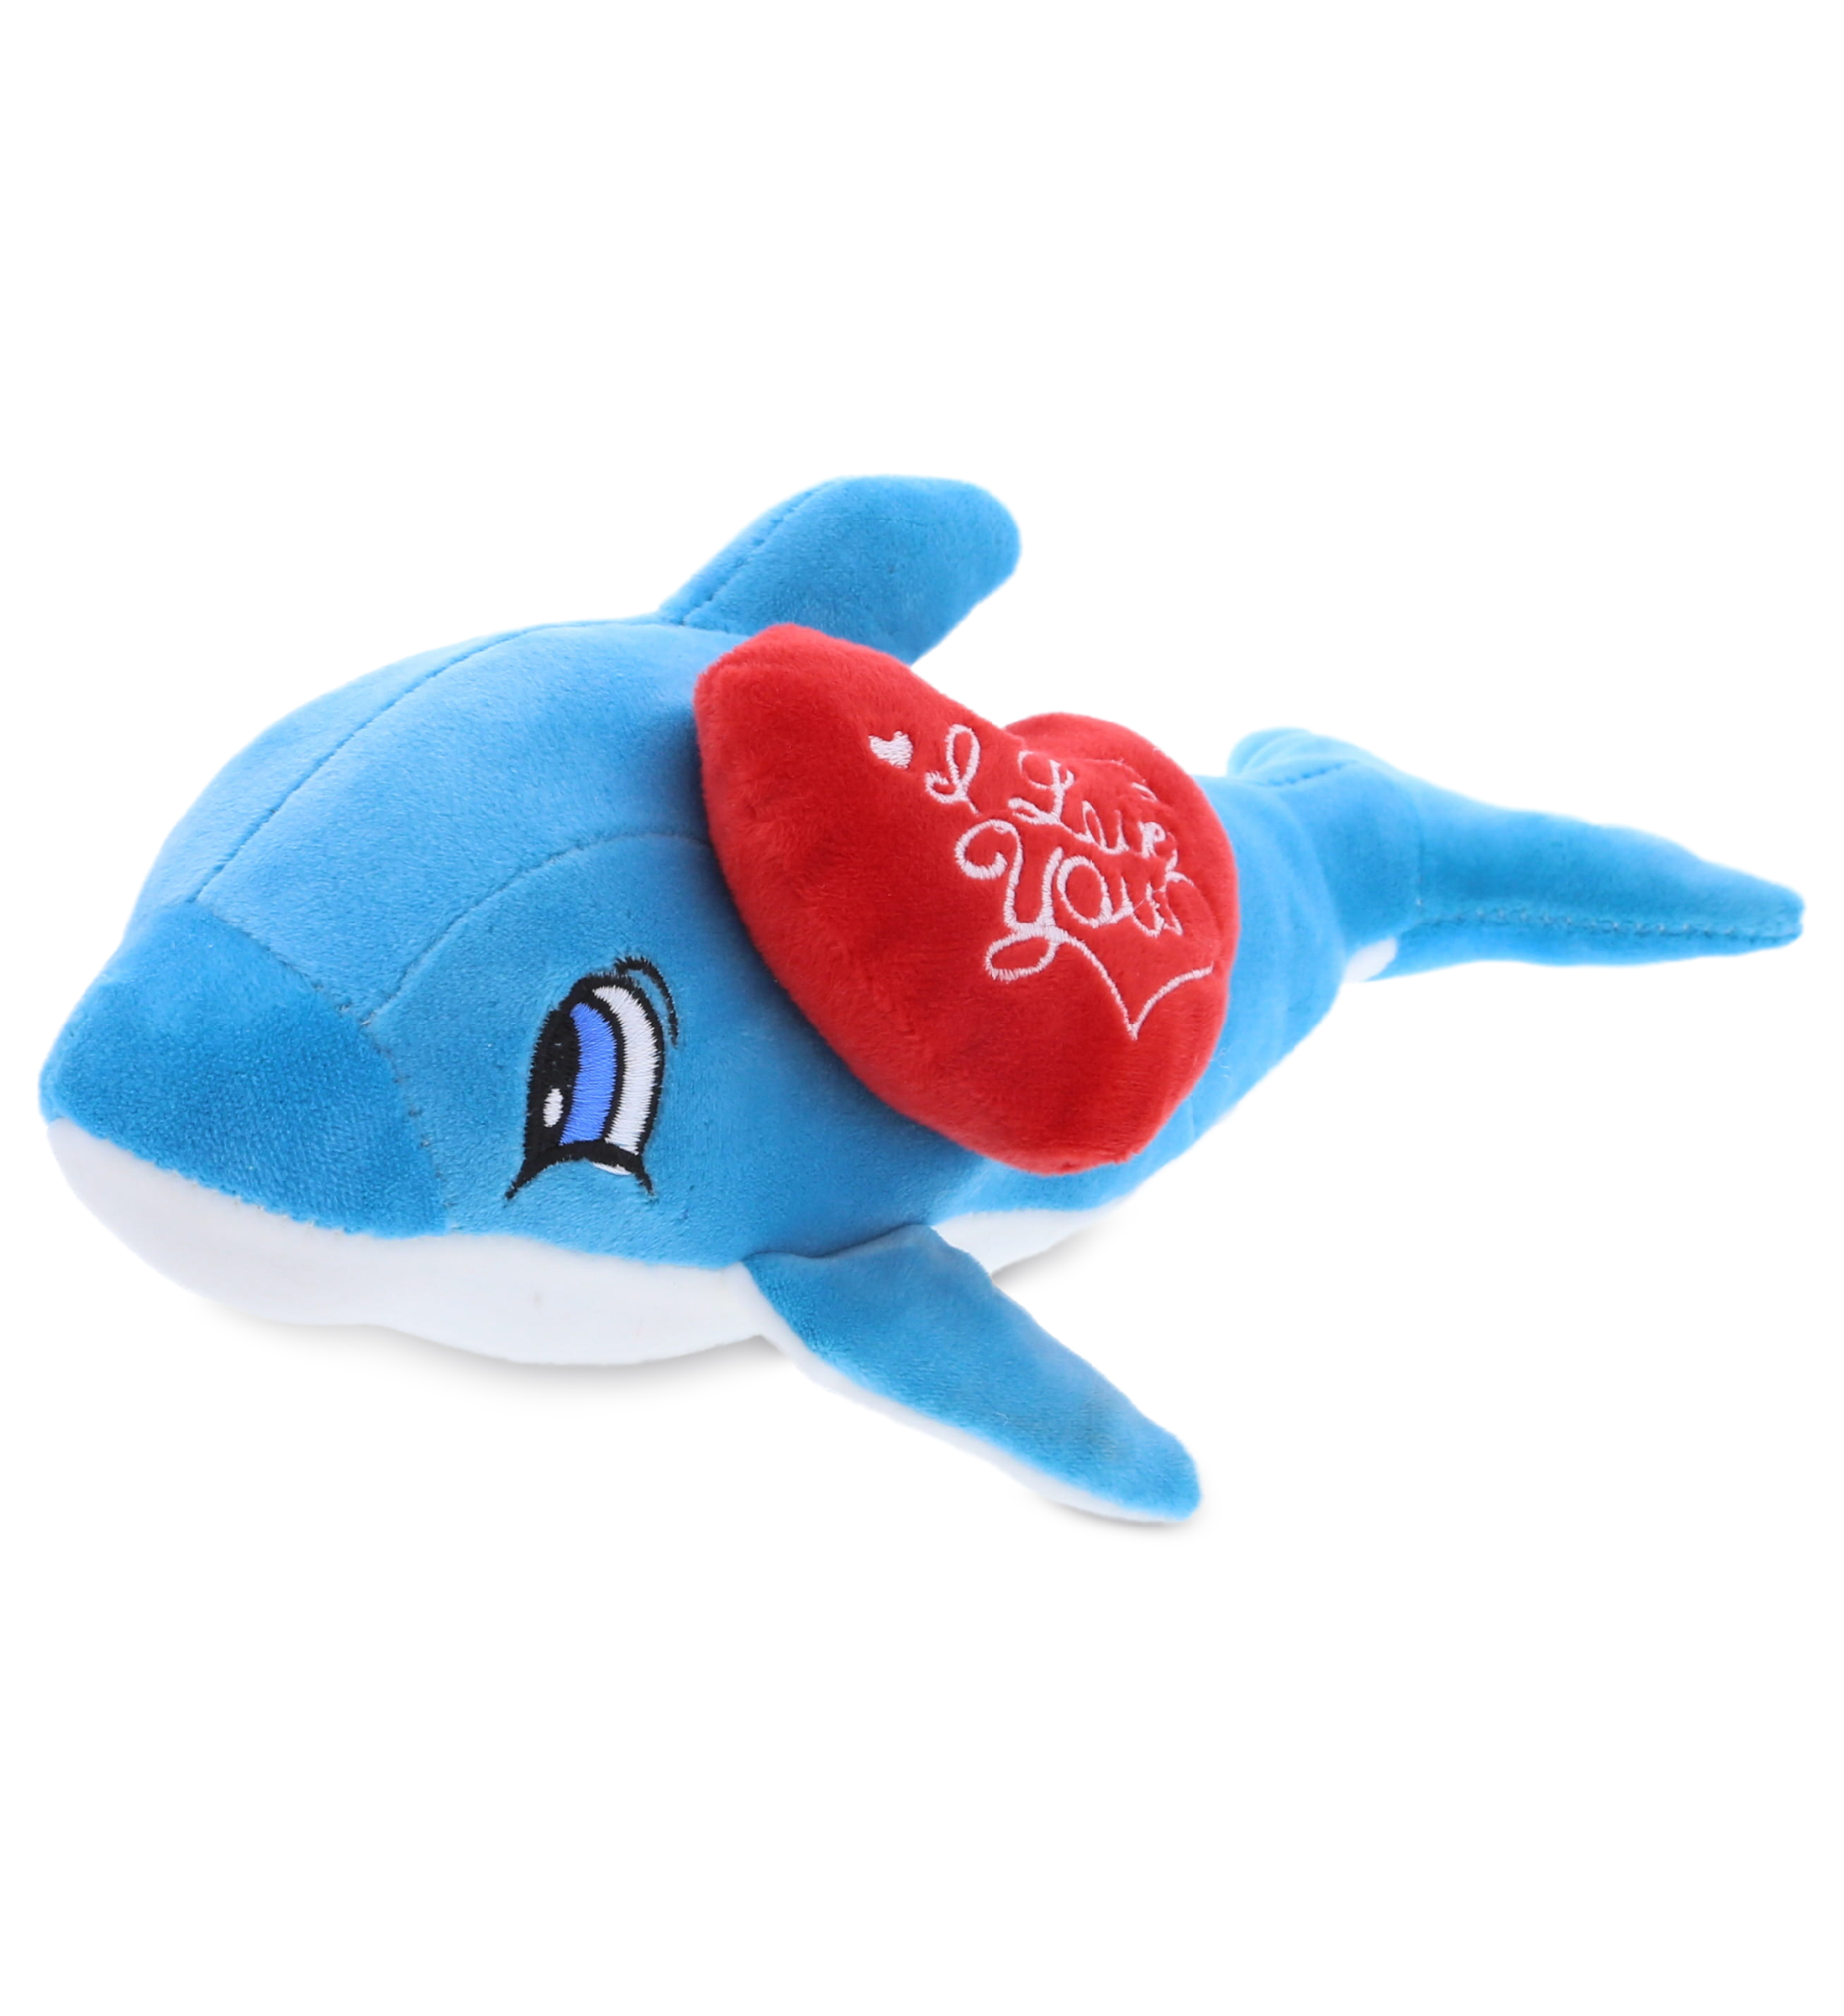 DolliBu I LOVE YOU Baby Soft Plush Blue Dolphin – Cute Stuffed Animal with  Red Heart And With Name Personalization For Valentine, Anniversary,  Romantic Date, Boyfriend or Girlfriend Gift – ″ - DolliBu